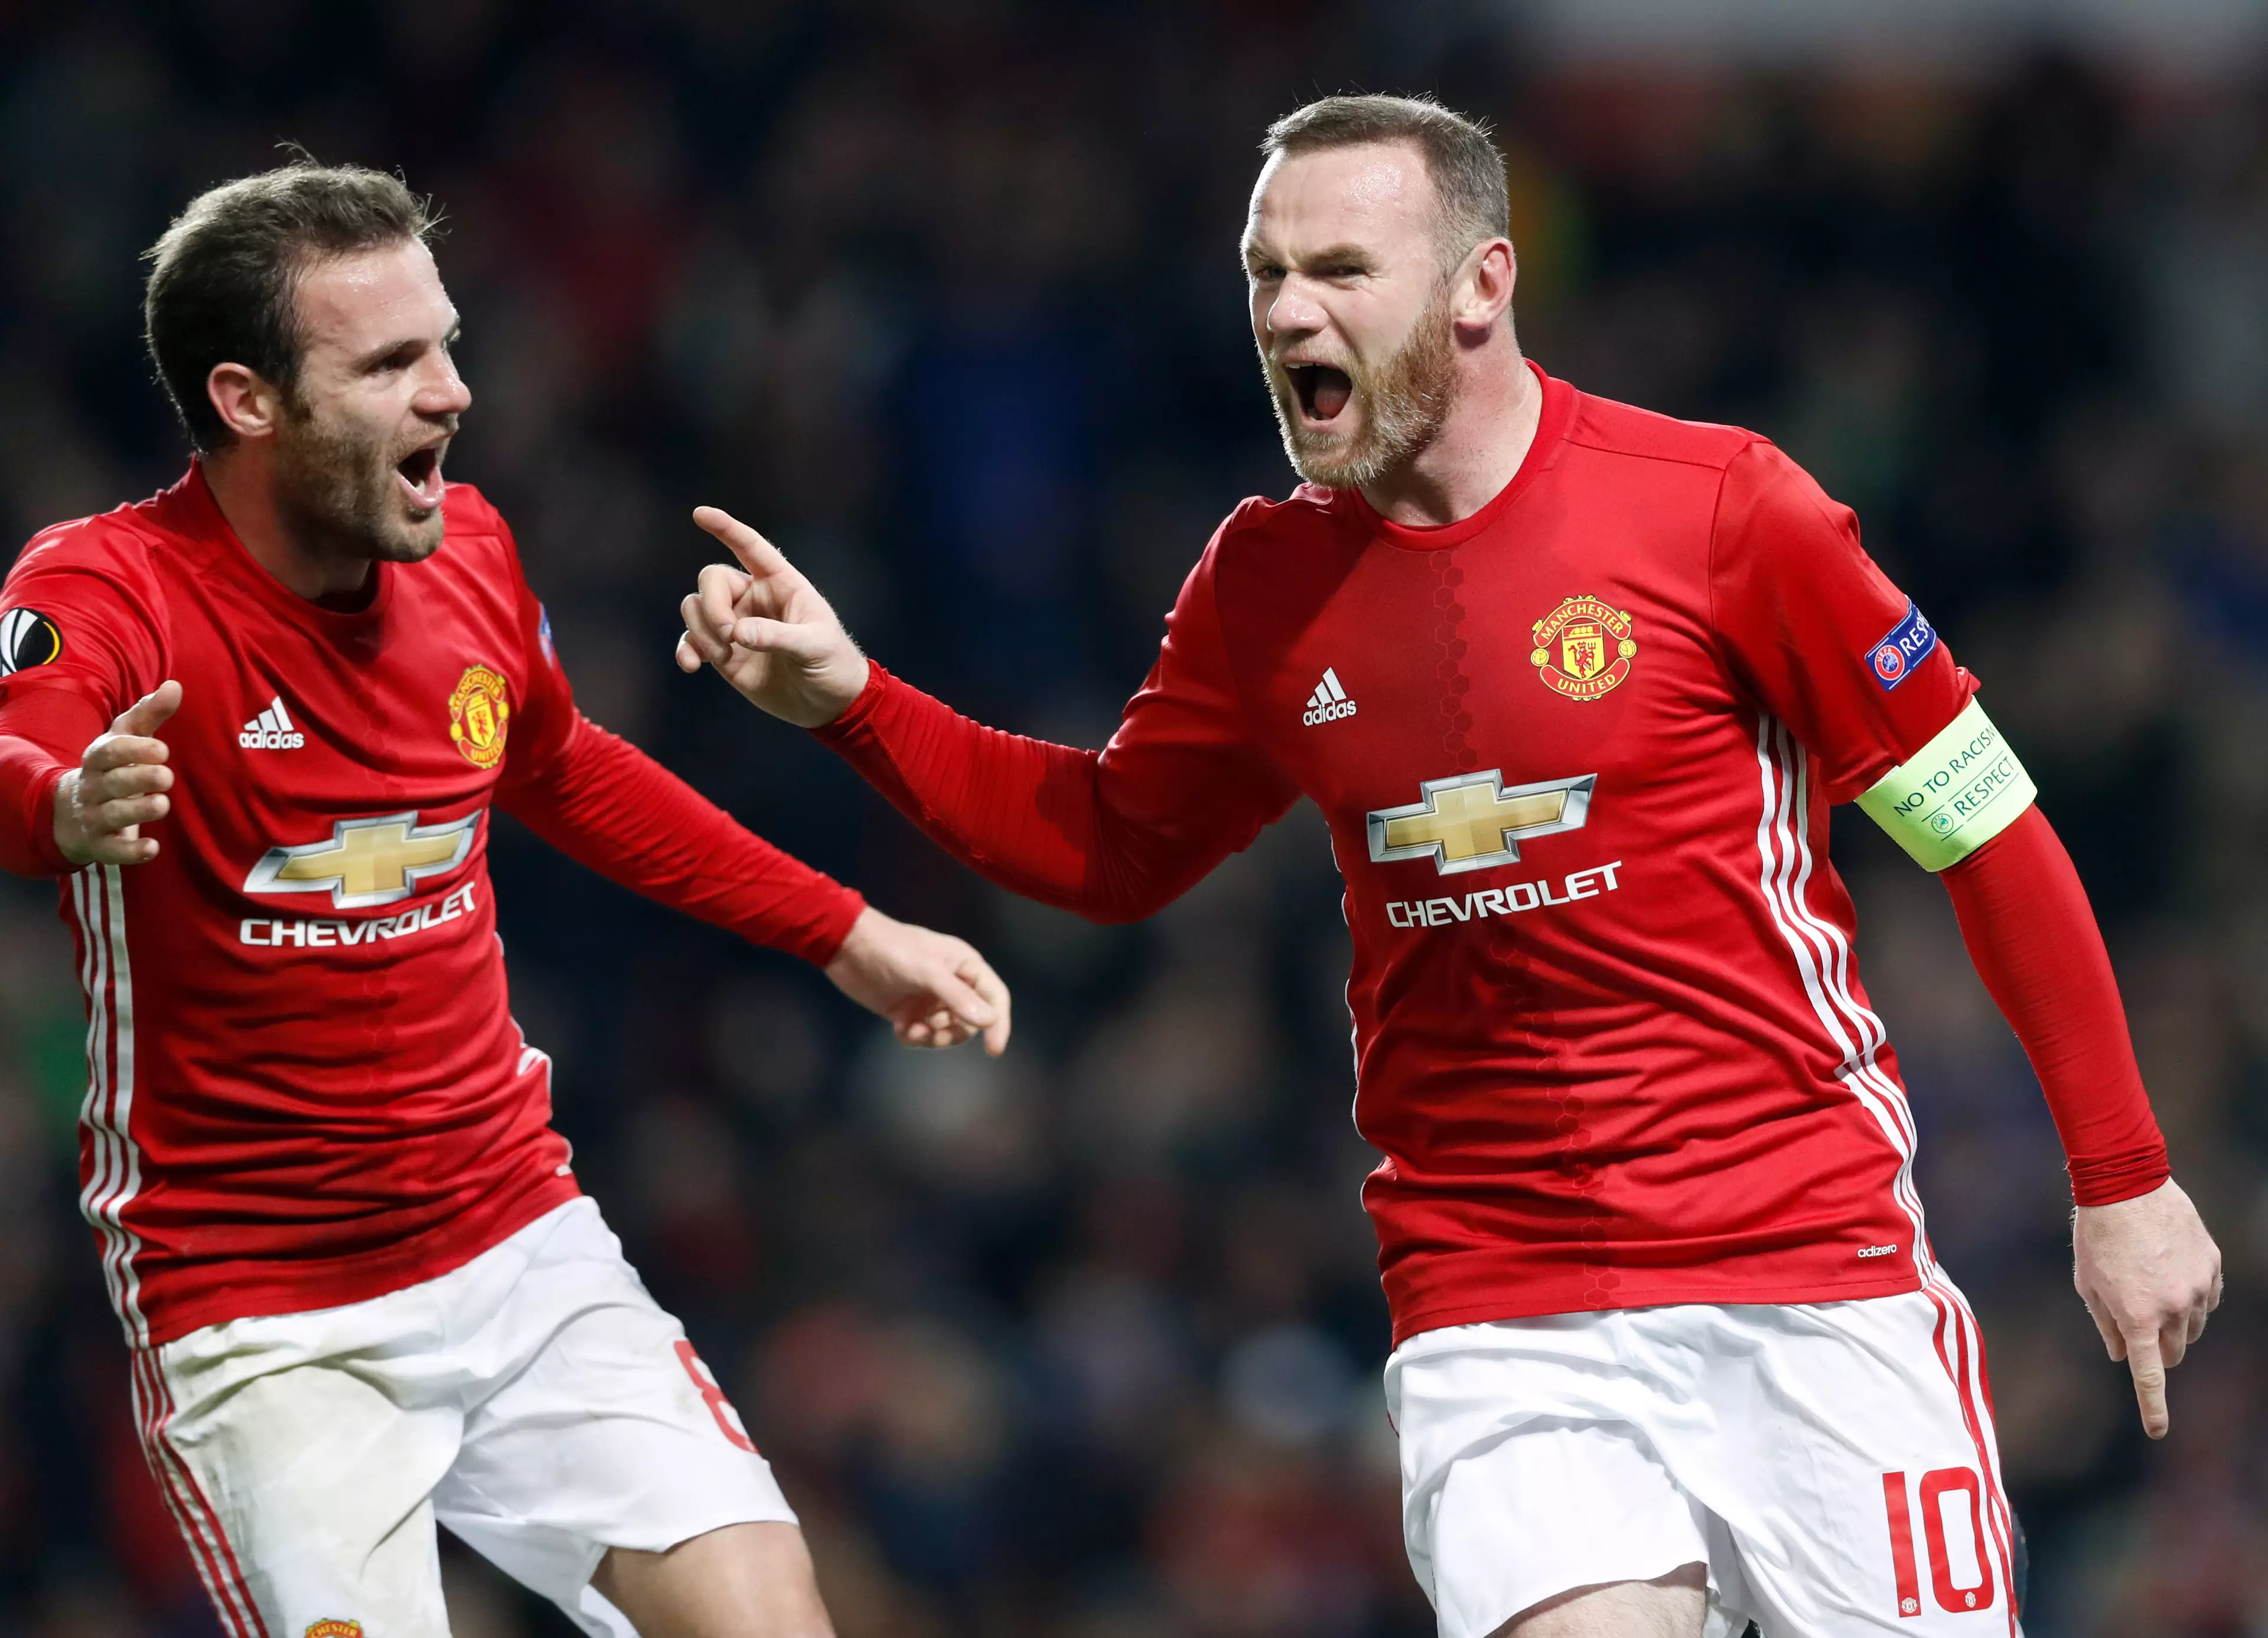 Football Agent Says Champions League Club Have Been Offered Wayne Rooney